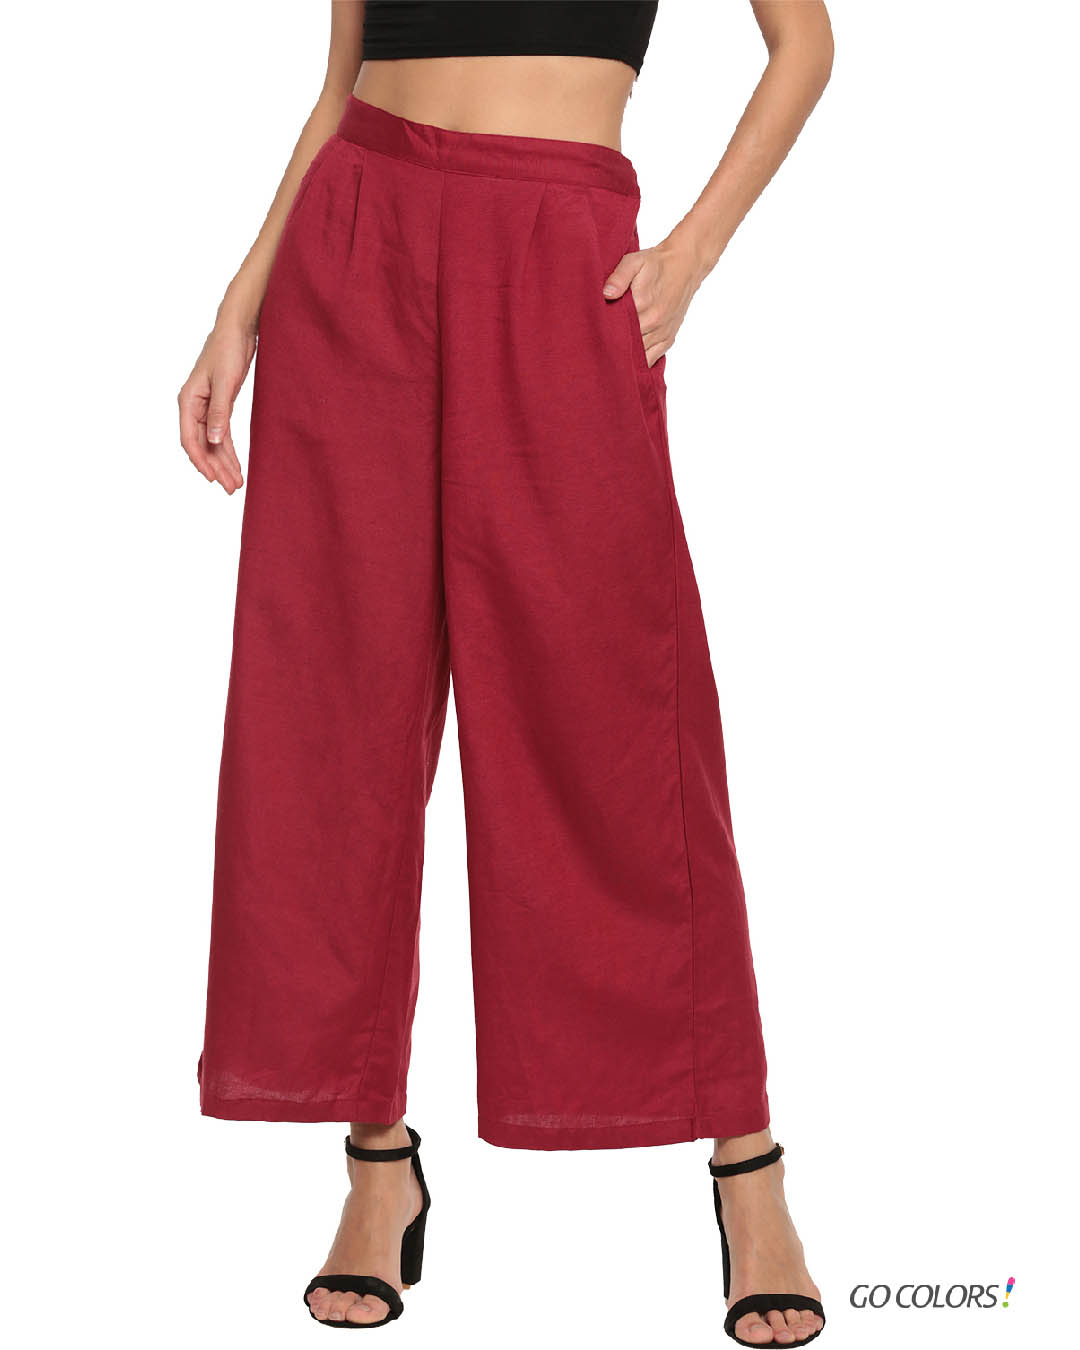 Top more than 90 go colors trousers latest - in.duhocakina